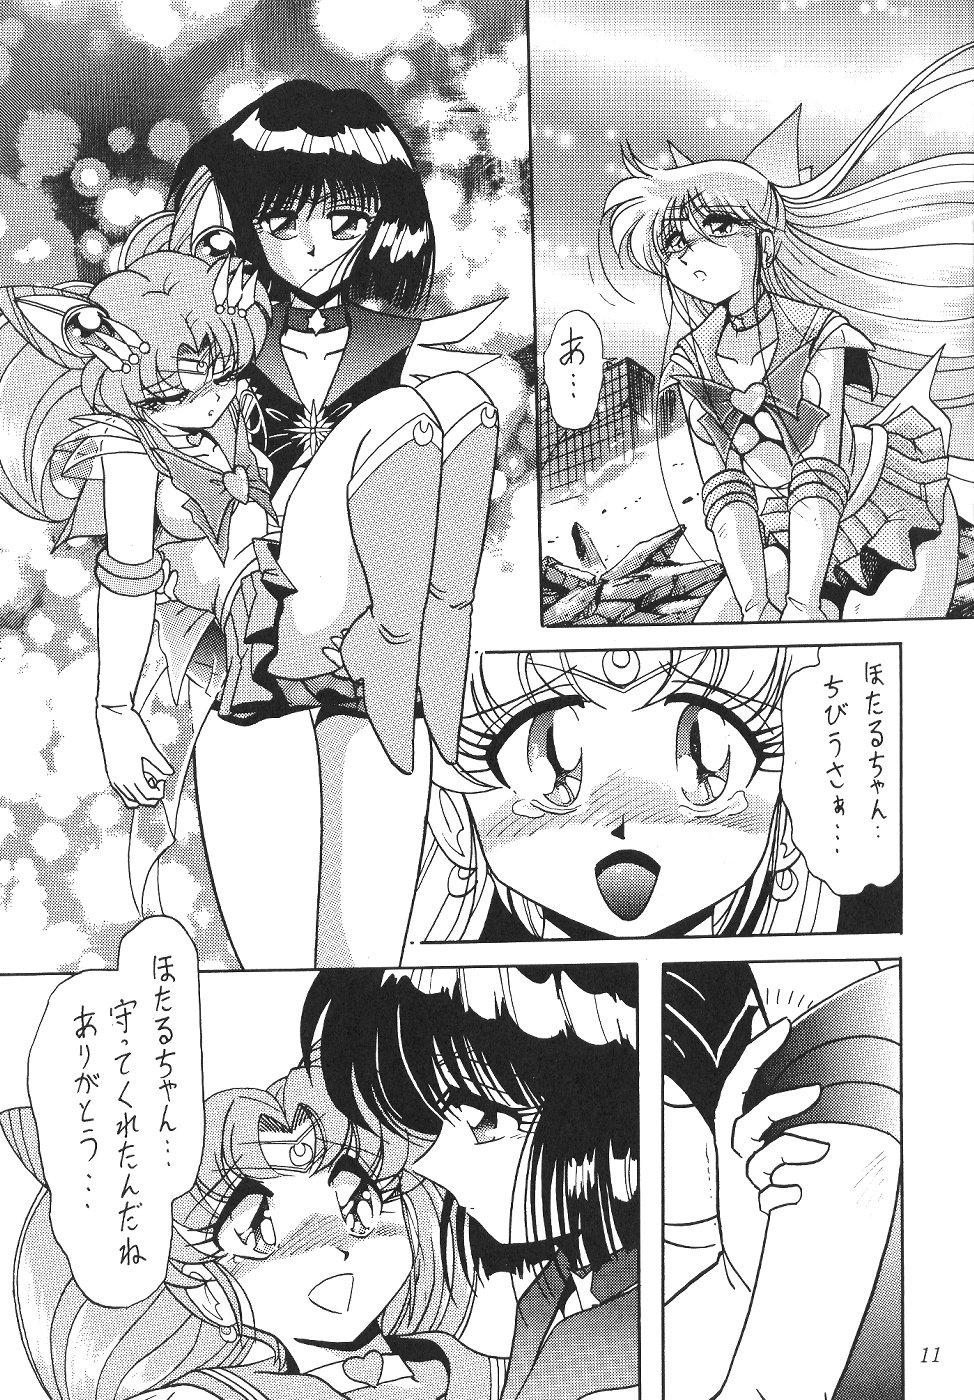 Hot Couple Sex Silent Saturn 11 - Sailor moon Lick - Page 11